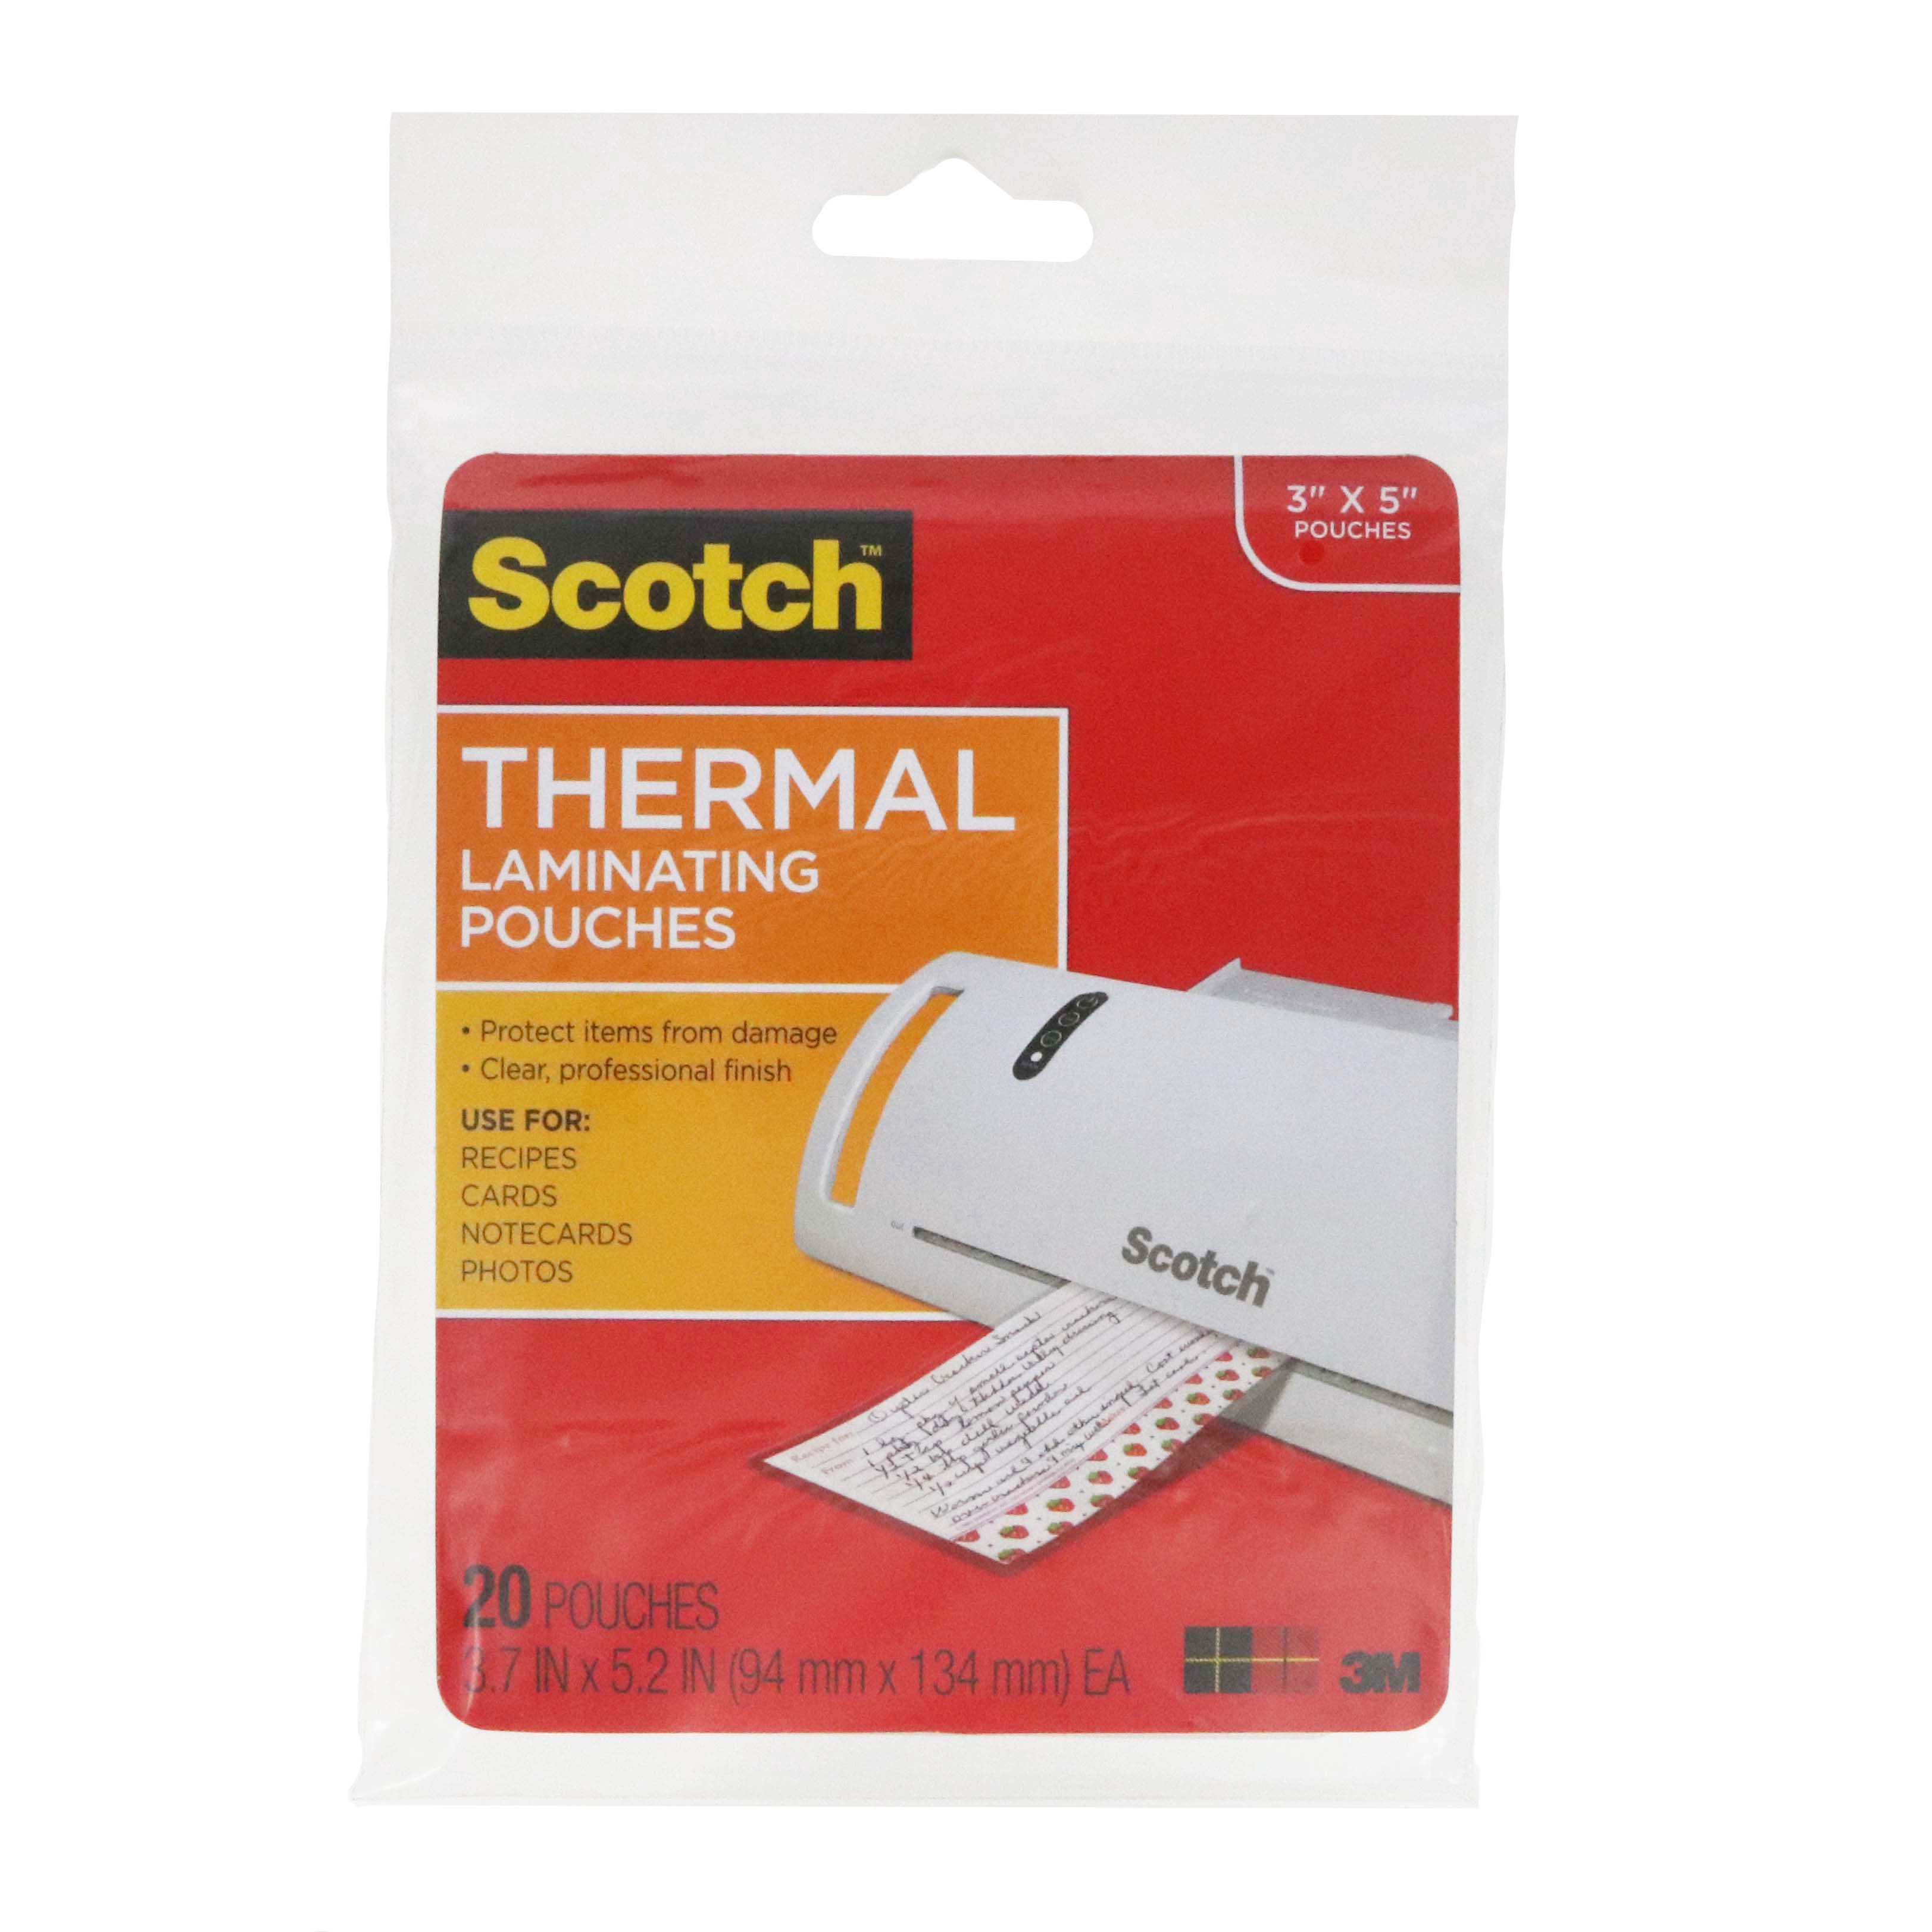 Scotch Thermal Laminating Pouches Shop Tools And Equipment At H E B 